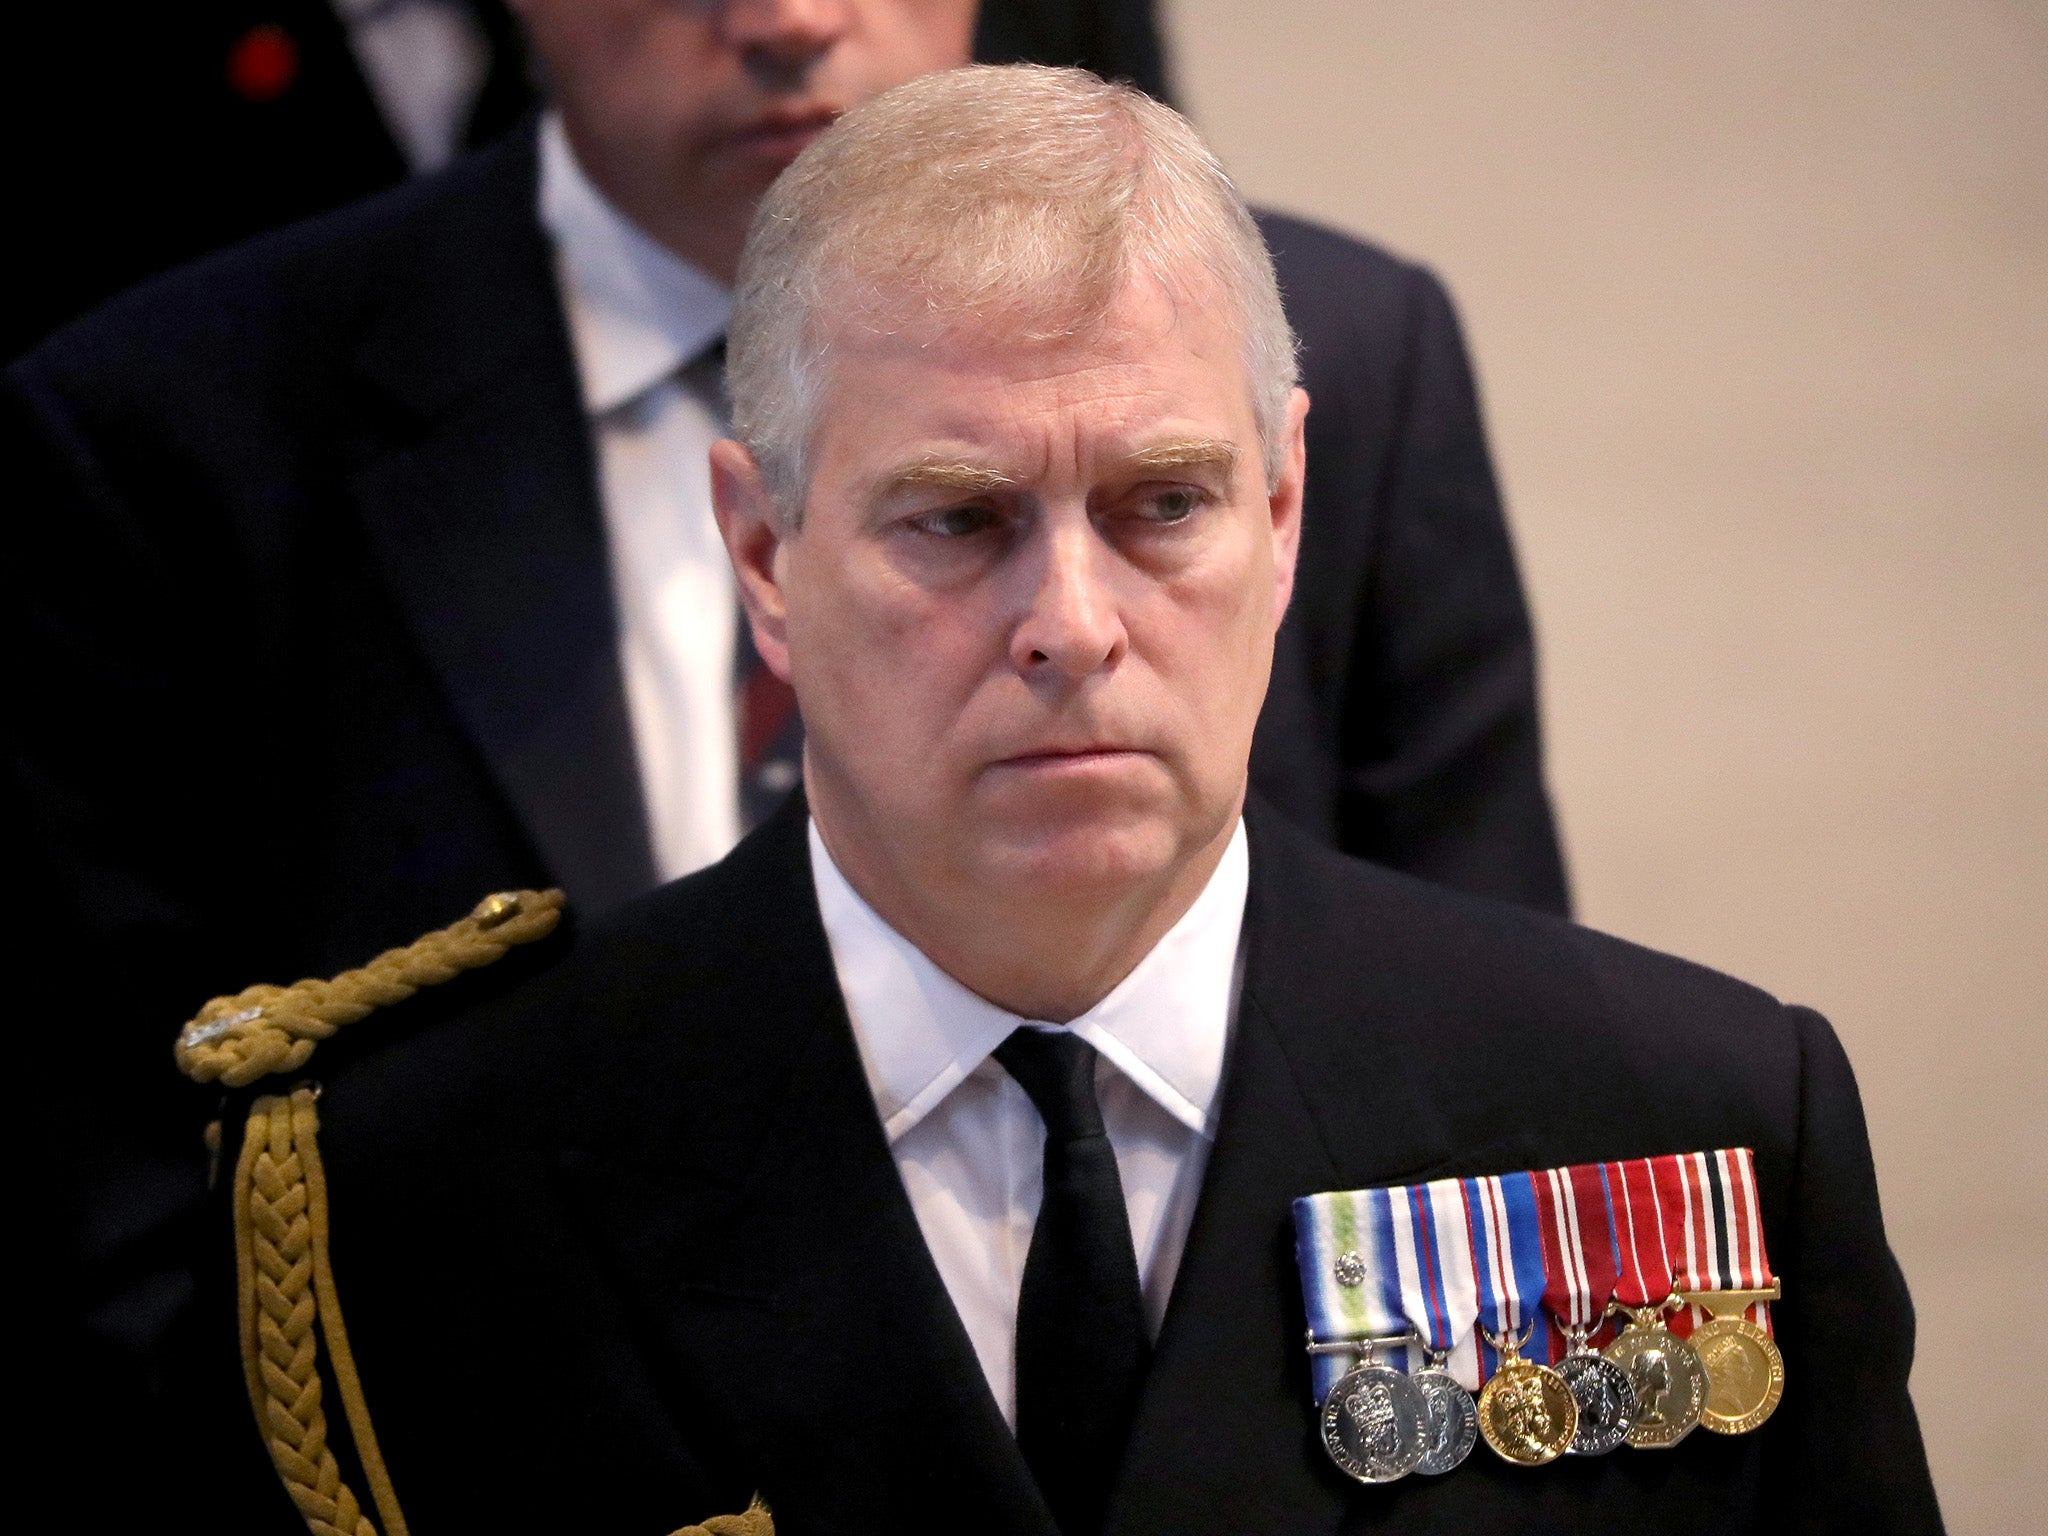 Andrew has already been stripped of his military titles and royal patronages